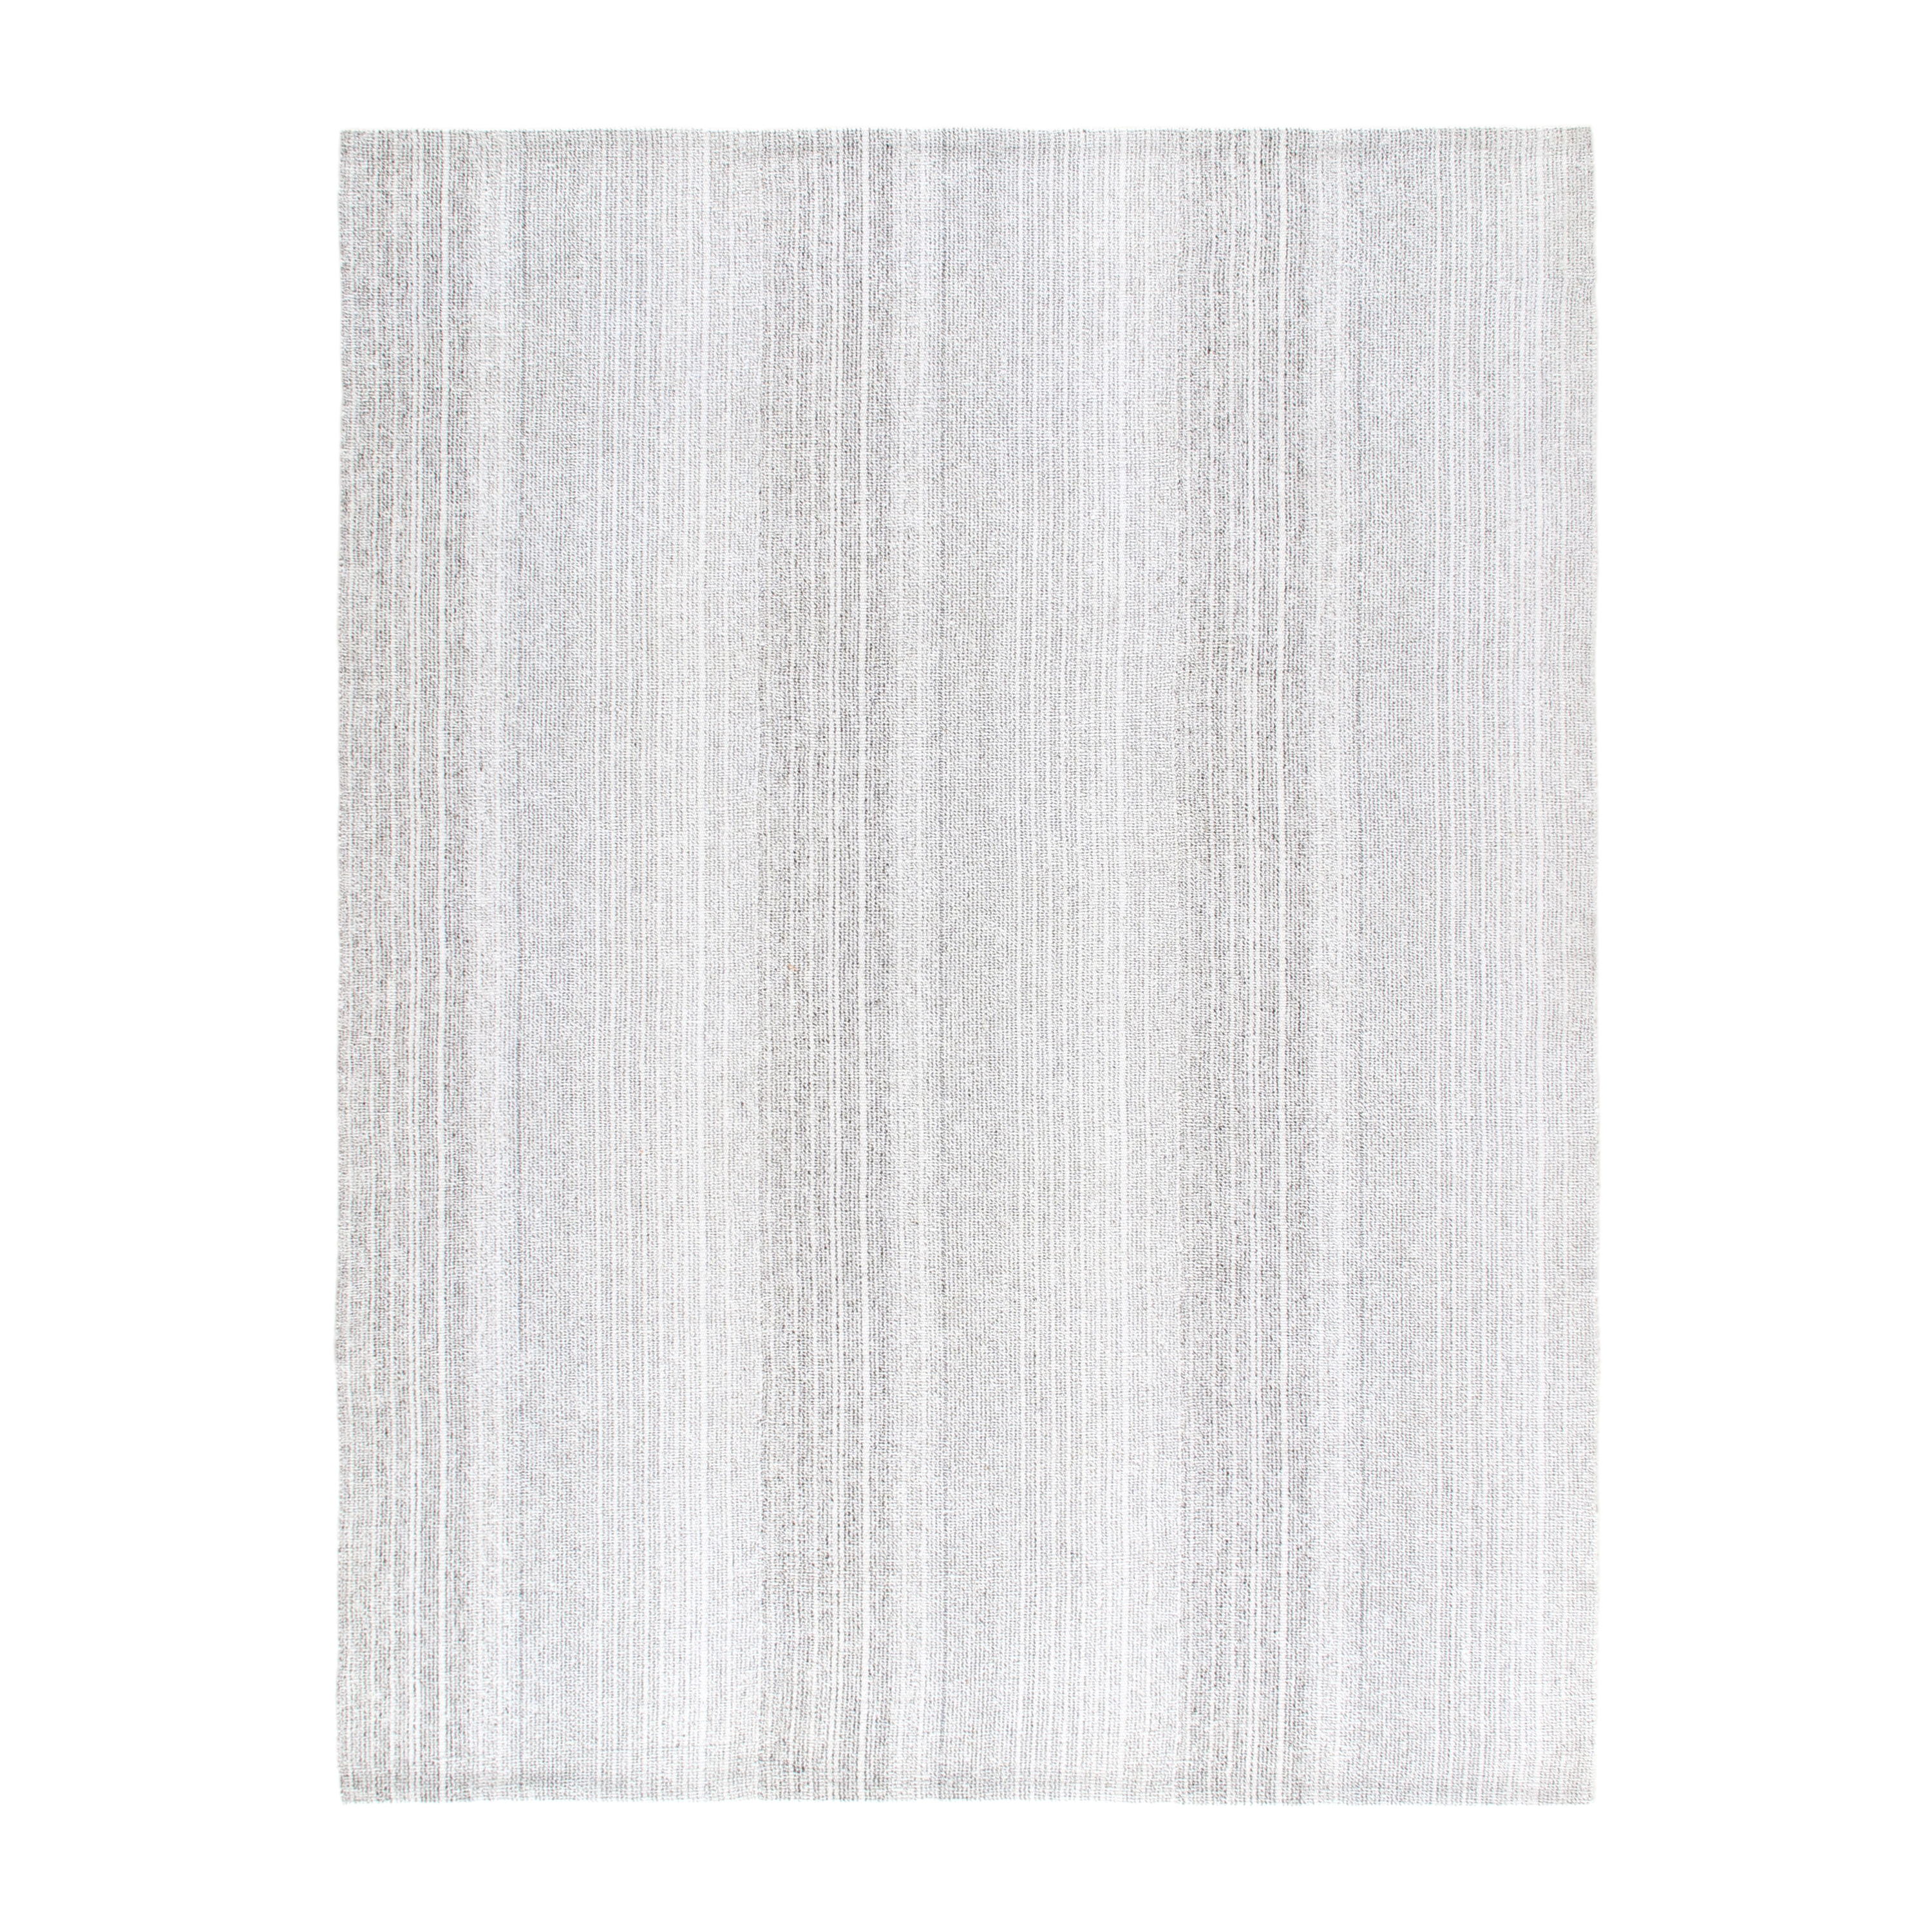 This Mid-Century rug is hand-woven and made of wool and cotton.